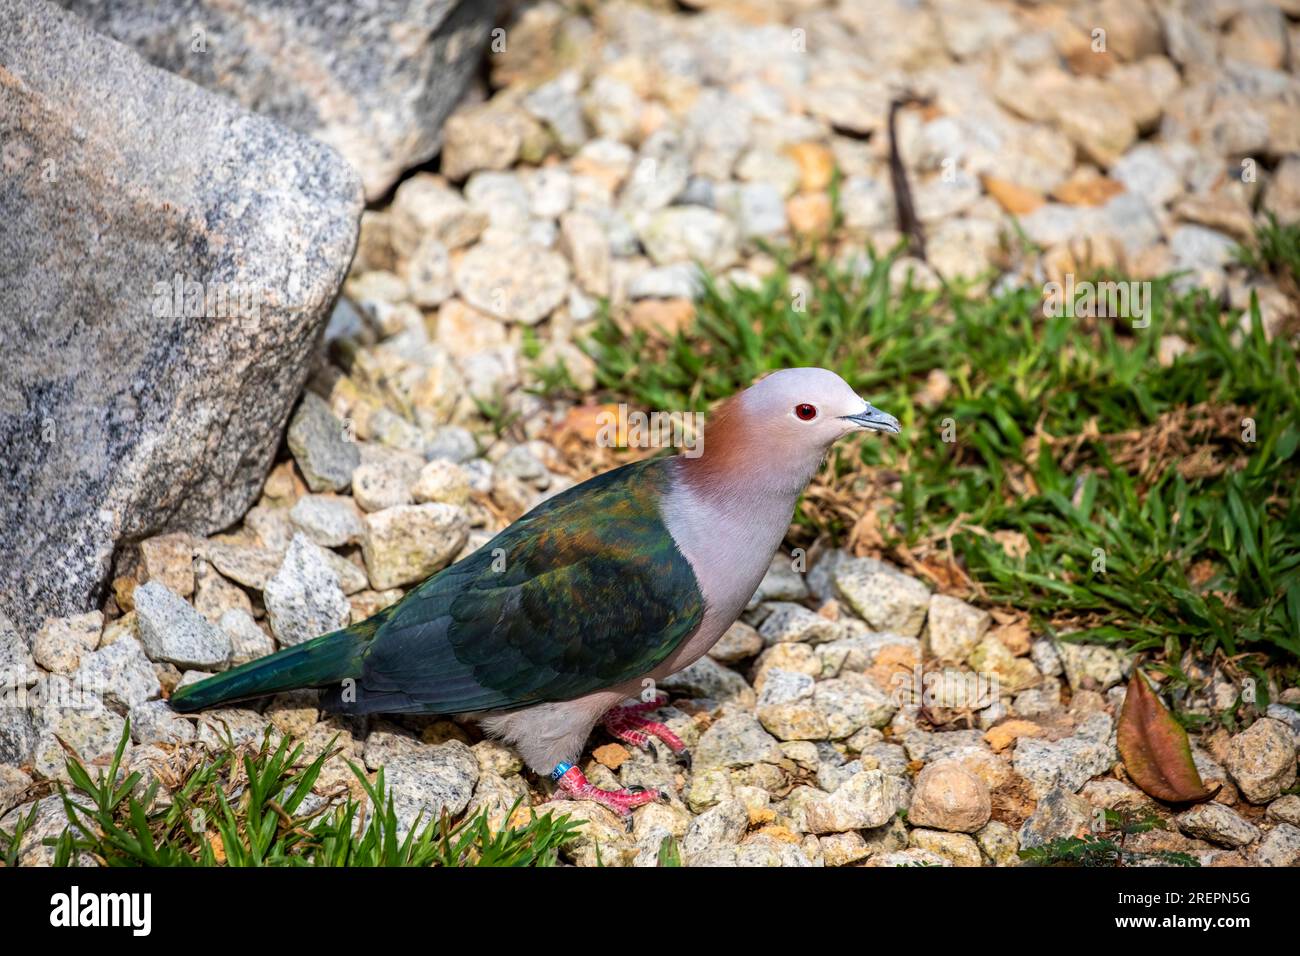 The chestnut-naped imperial pigeon (Ducula aenea paulina) stands on the ground. It is subspecies of Green imperial pigeon from Celebes Indonesia. Stock Photo